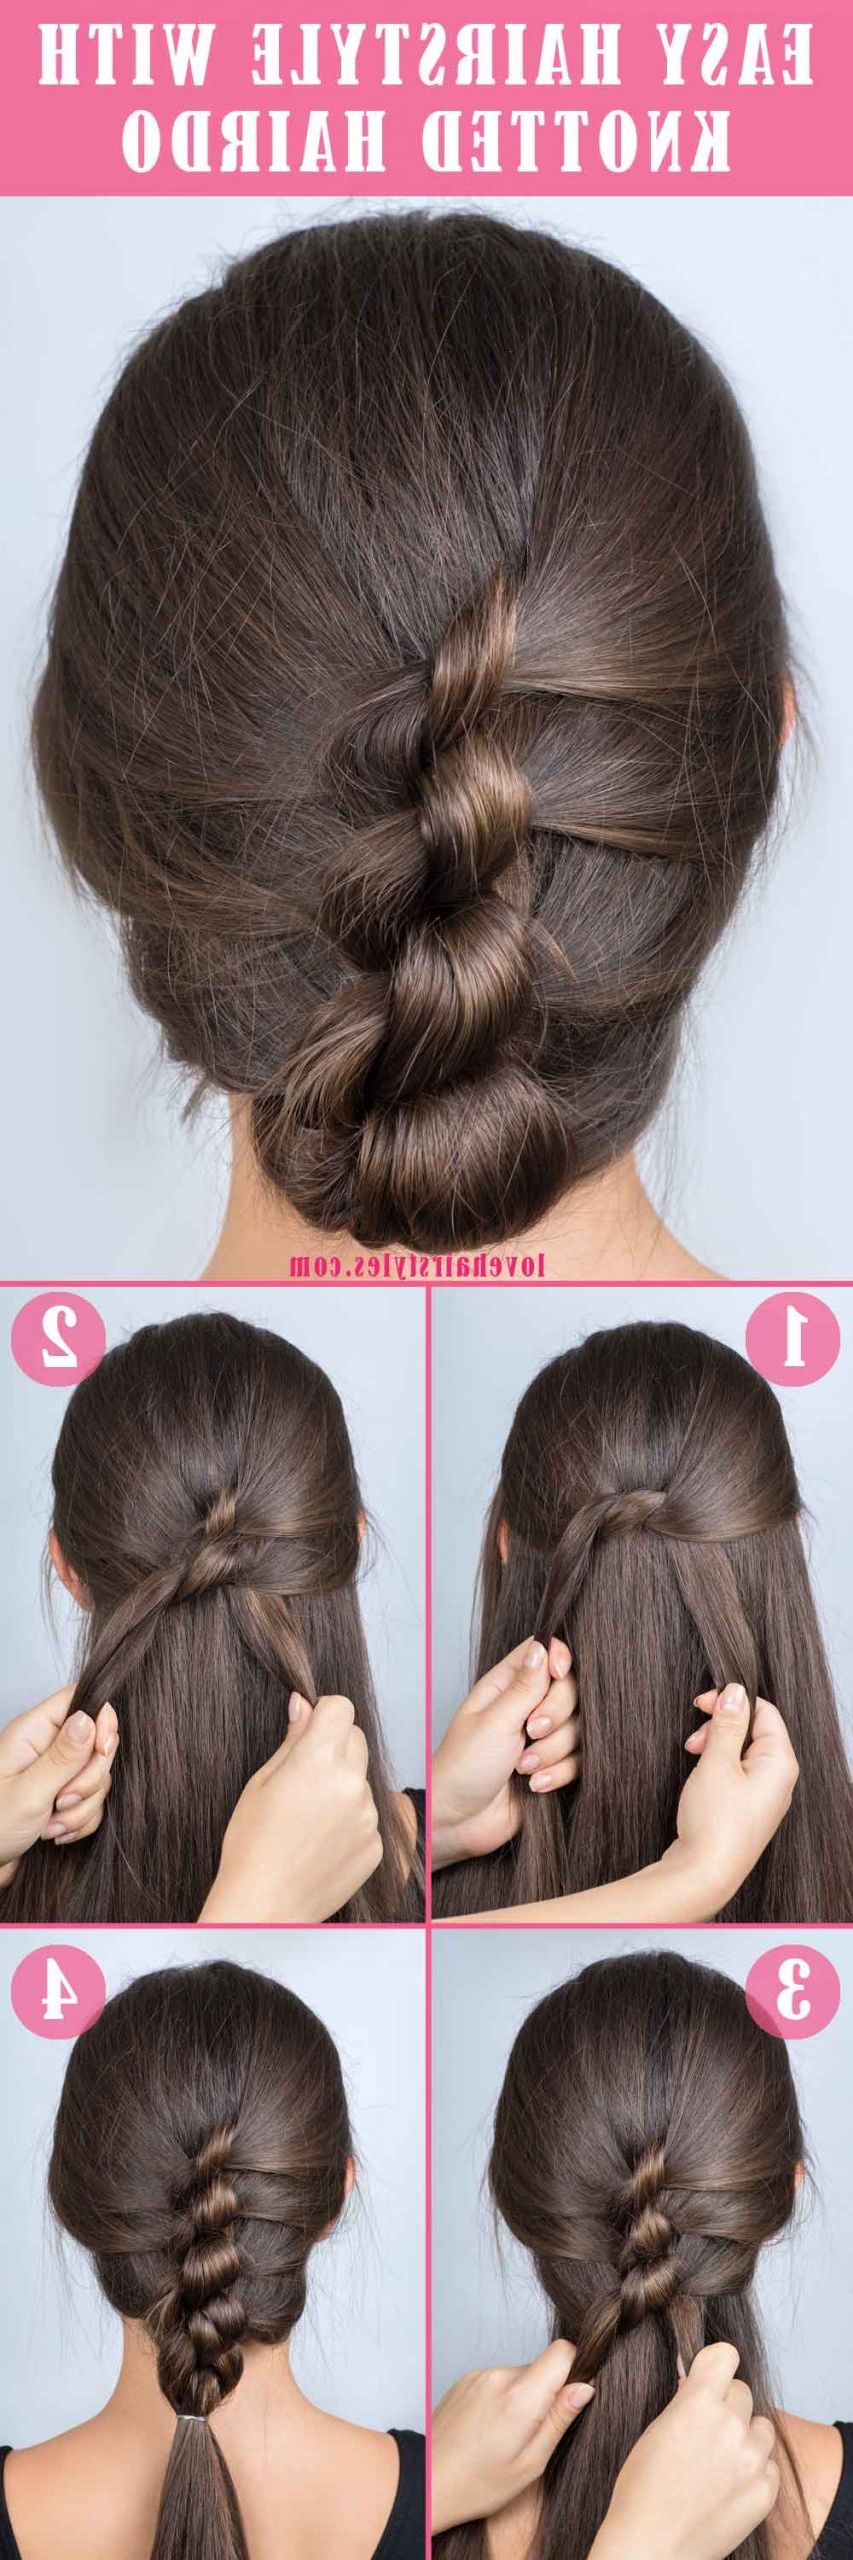 15 Perfectly Easy Hairstyles For Medium Hair – Love Hairstyles Inside Best And Newest Easy Hairstyles For Medium Length Hair (View 7 of 25)